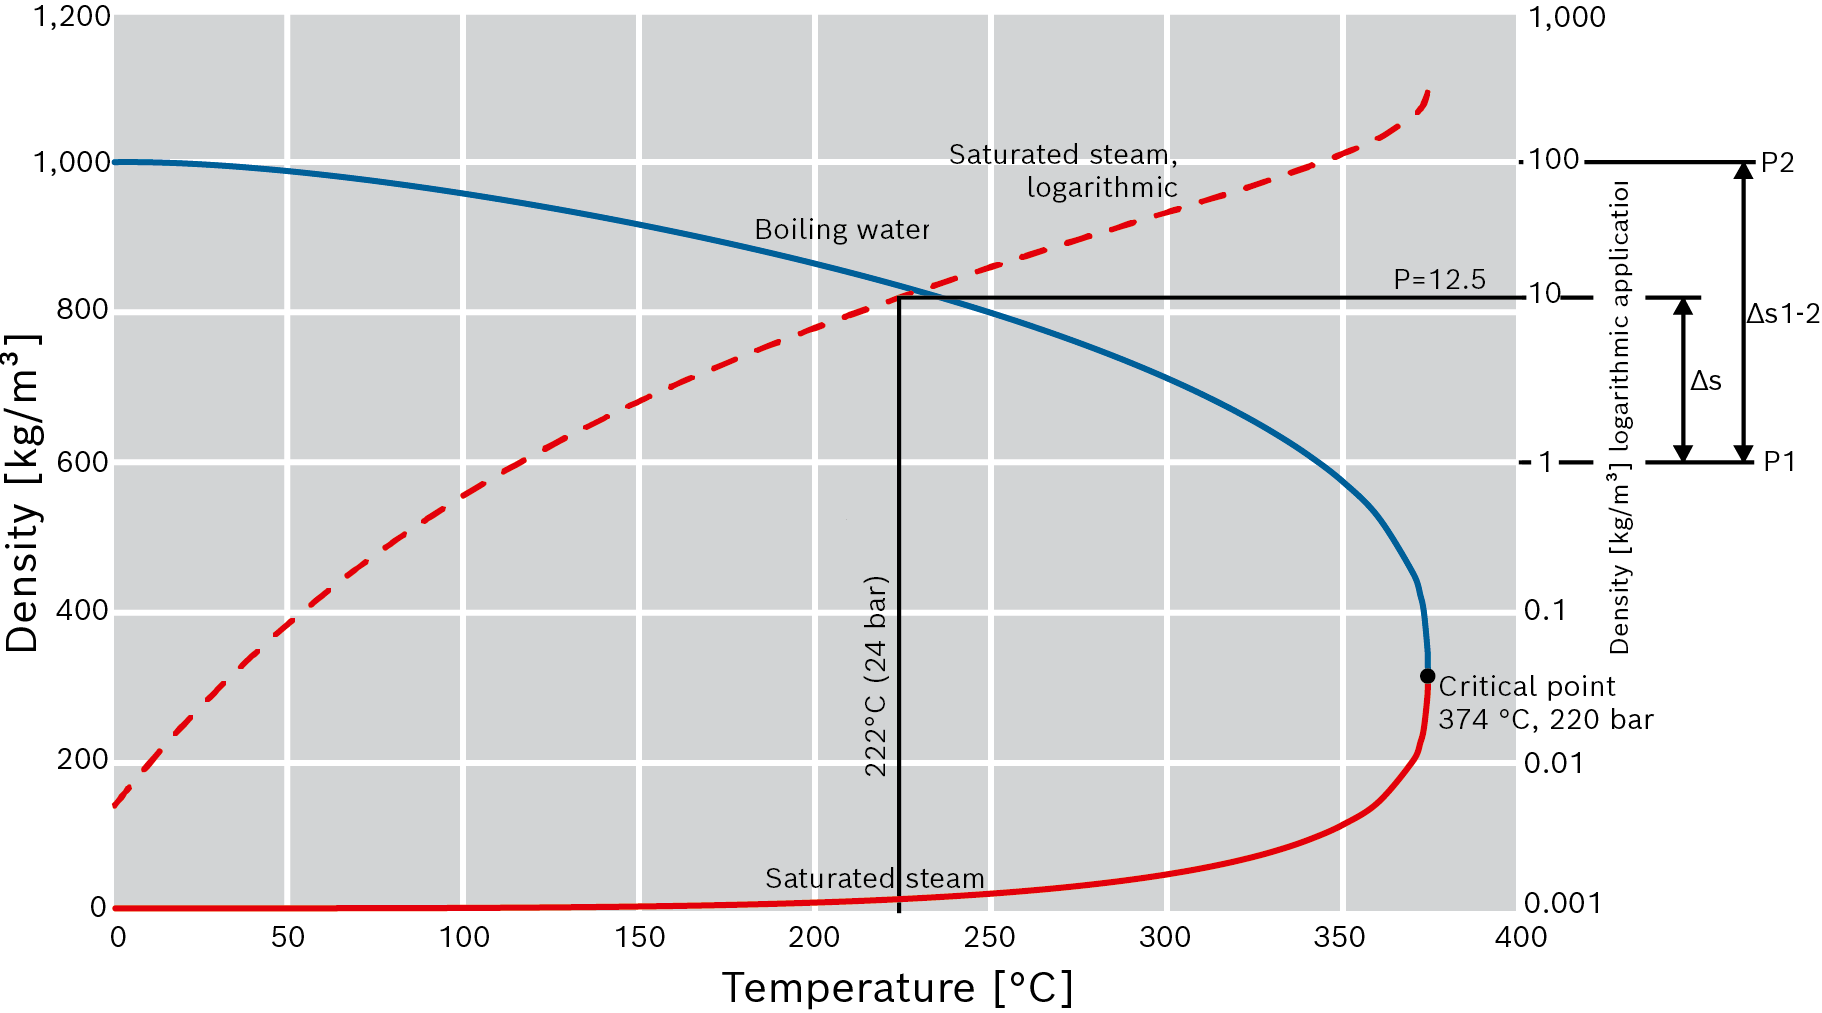 Density of saturated steam and water as a function of temperature